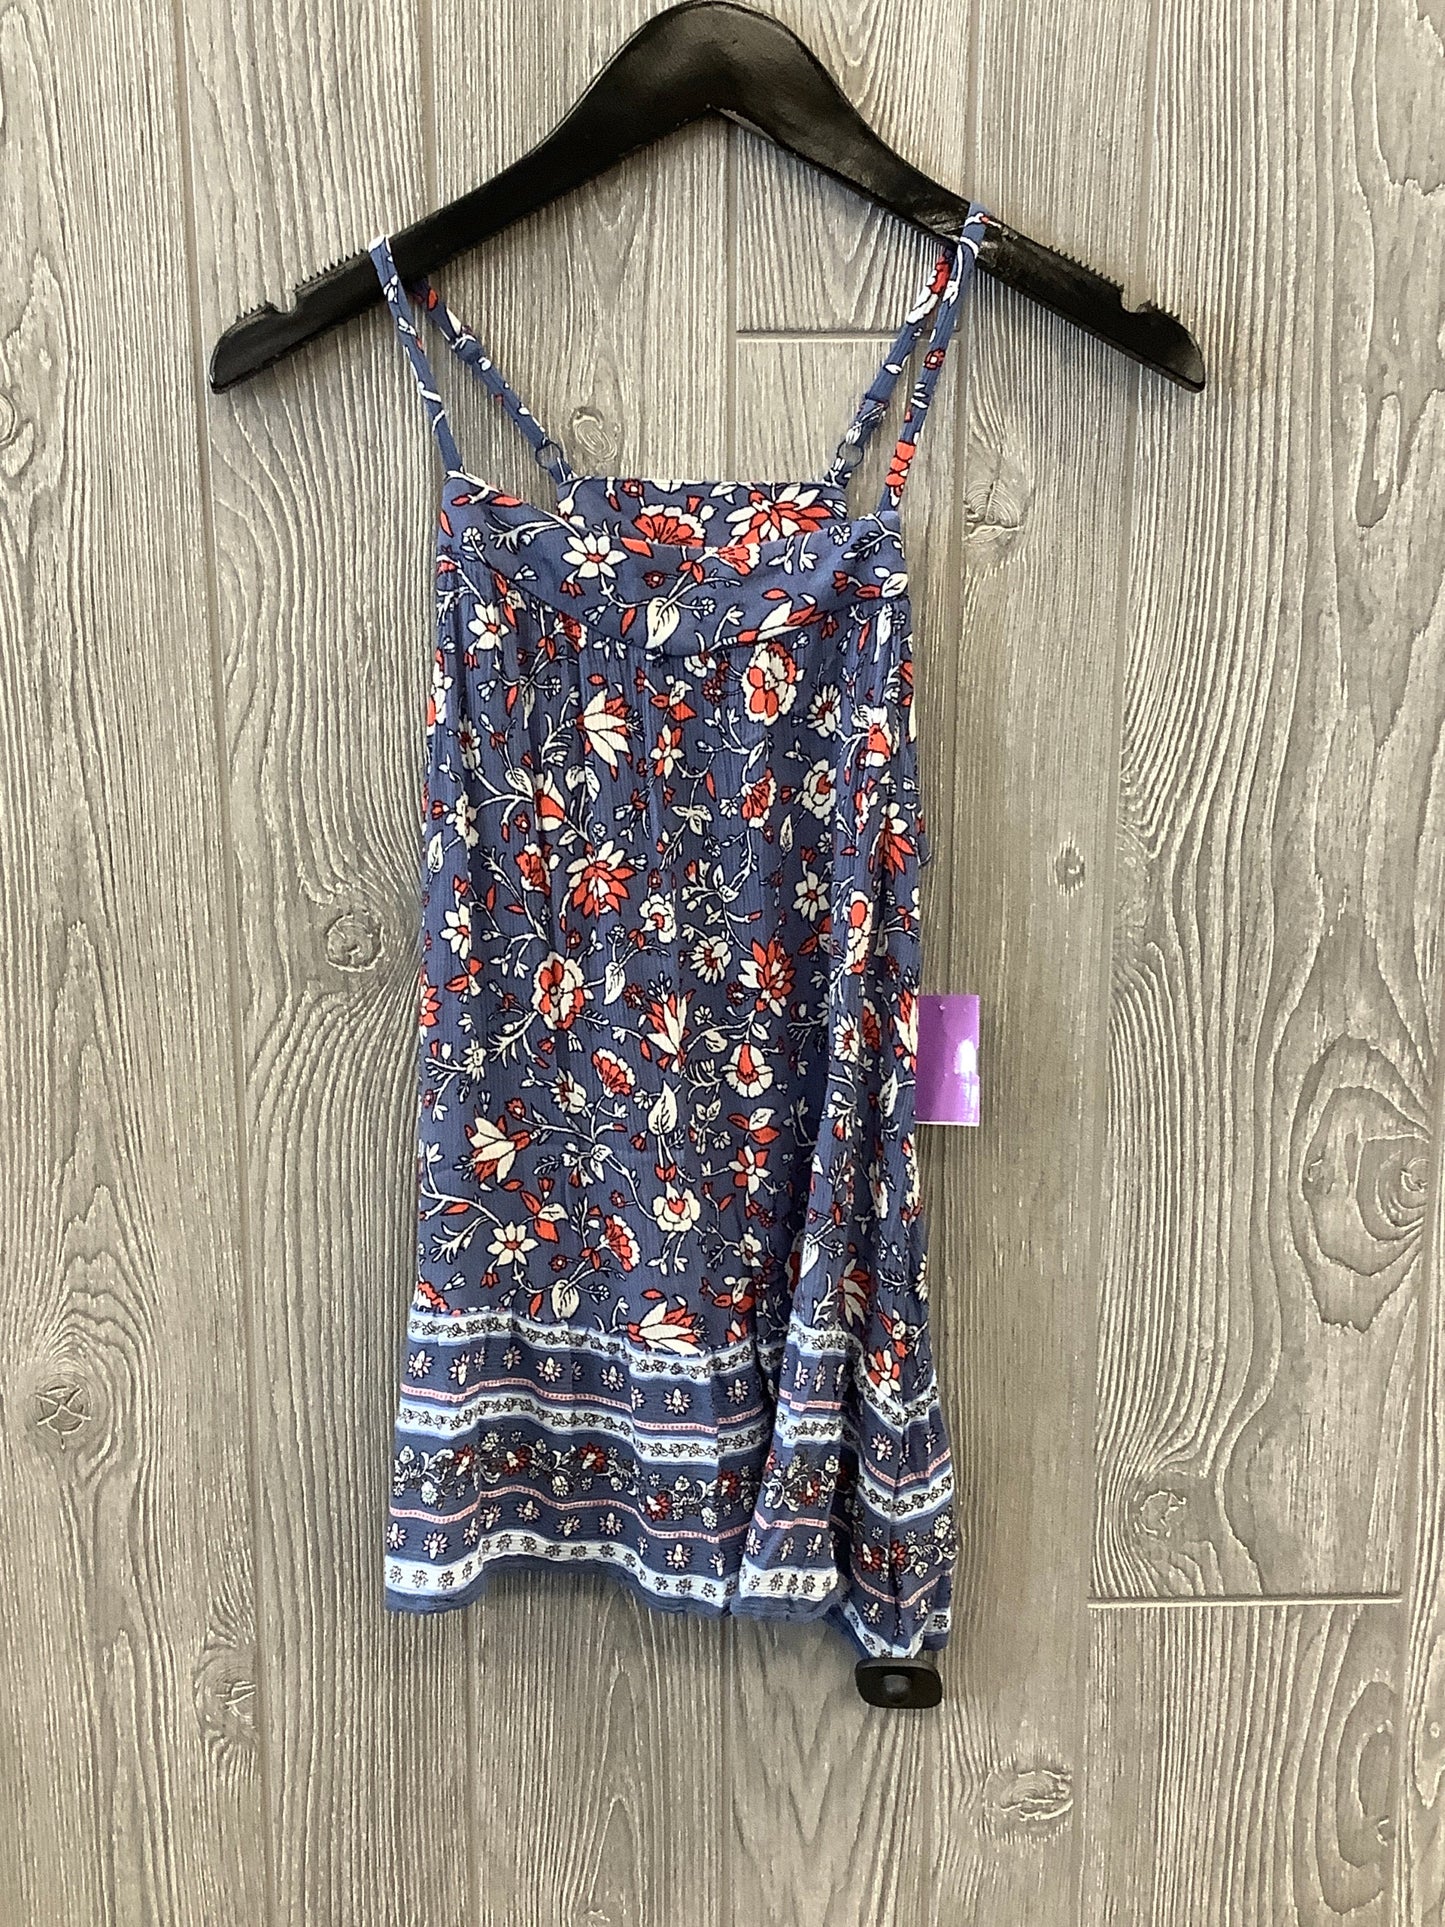 Blue Top Sleeveless Old Navy, Size Xs